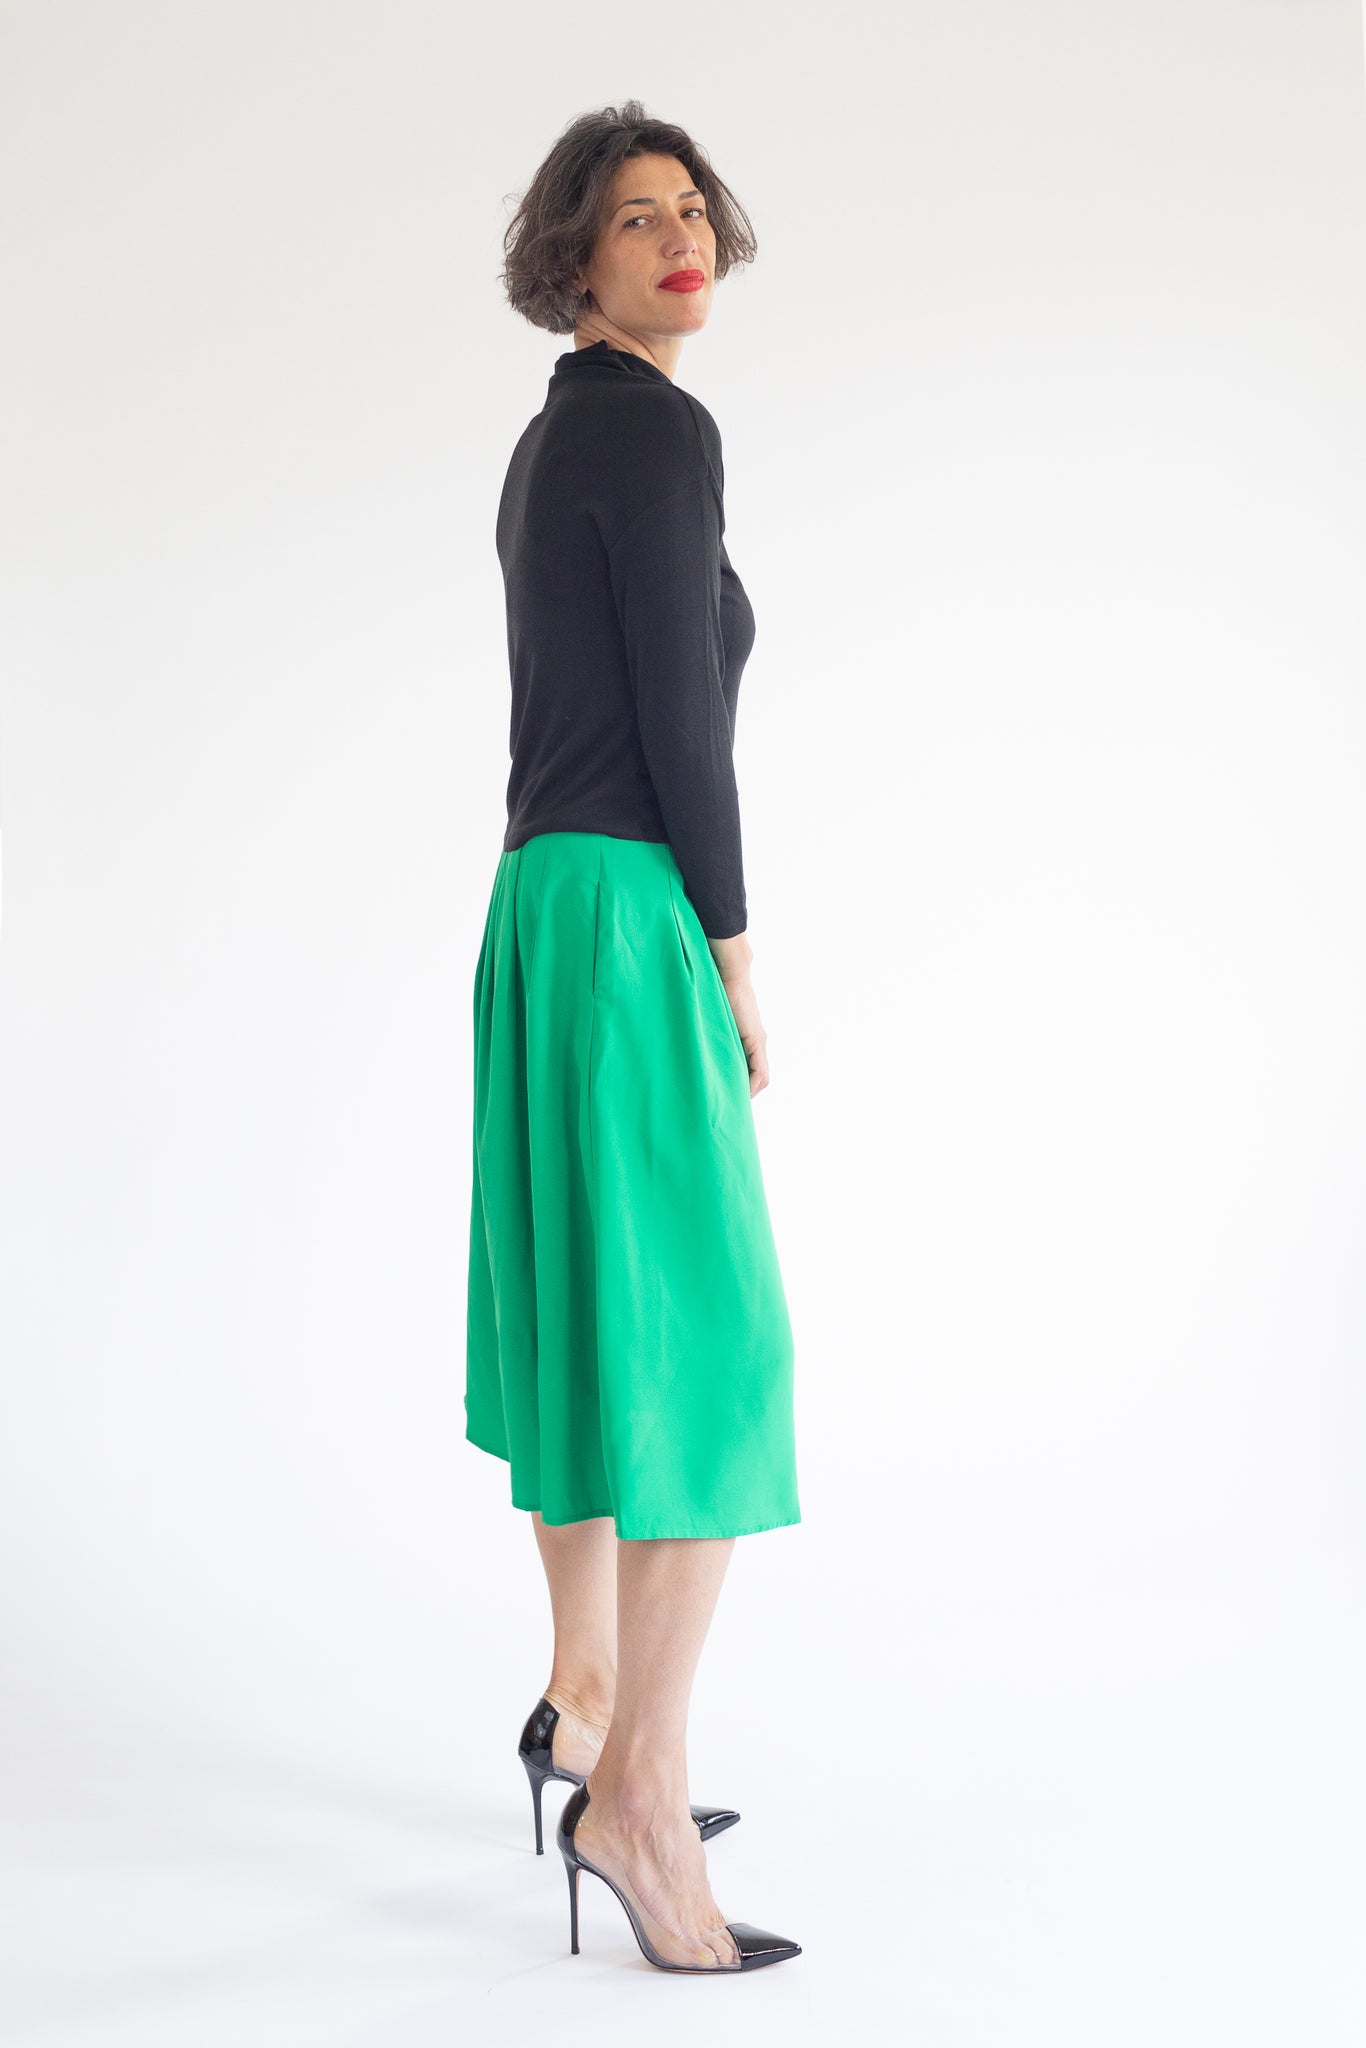 Green skirt with front buttons